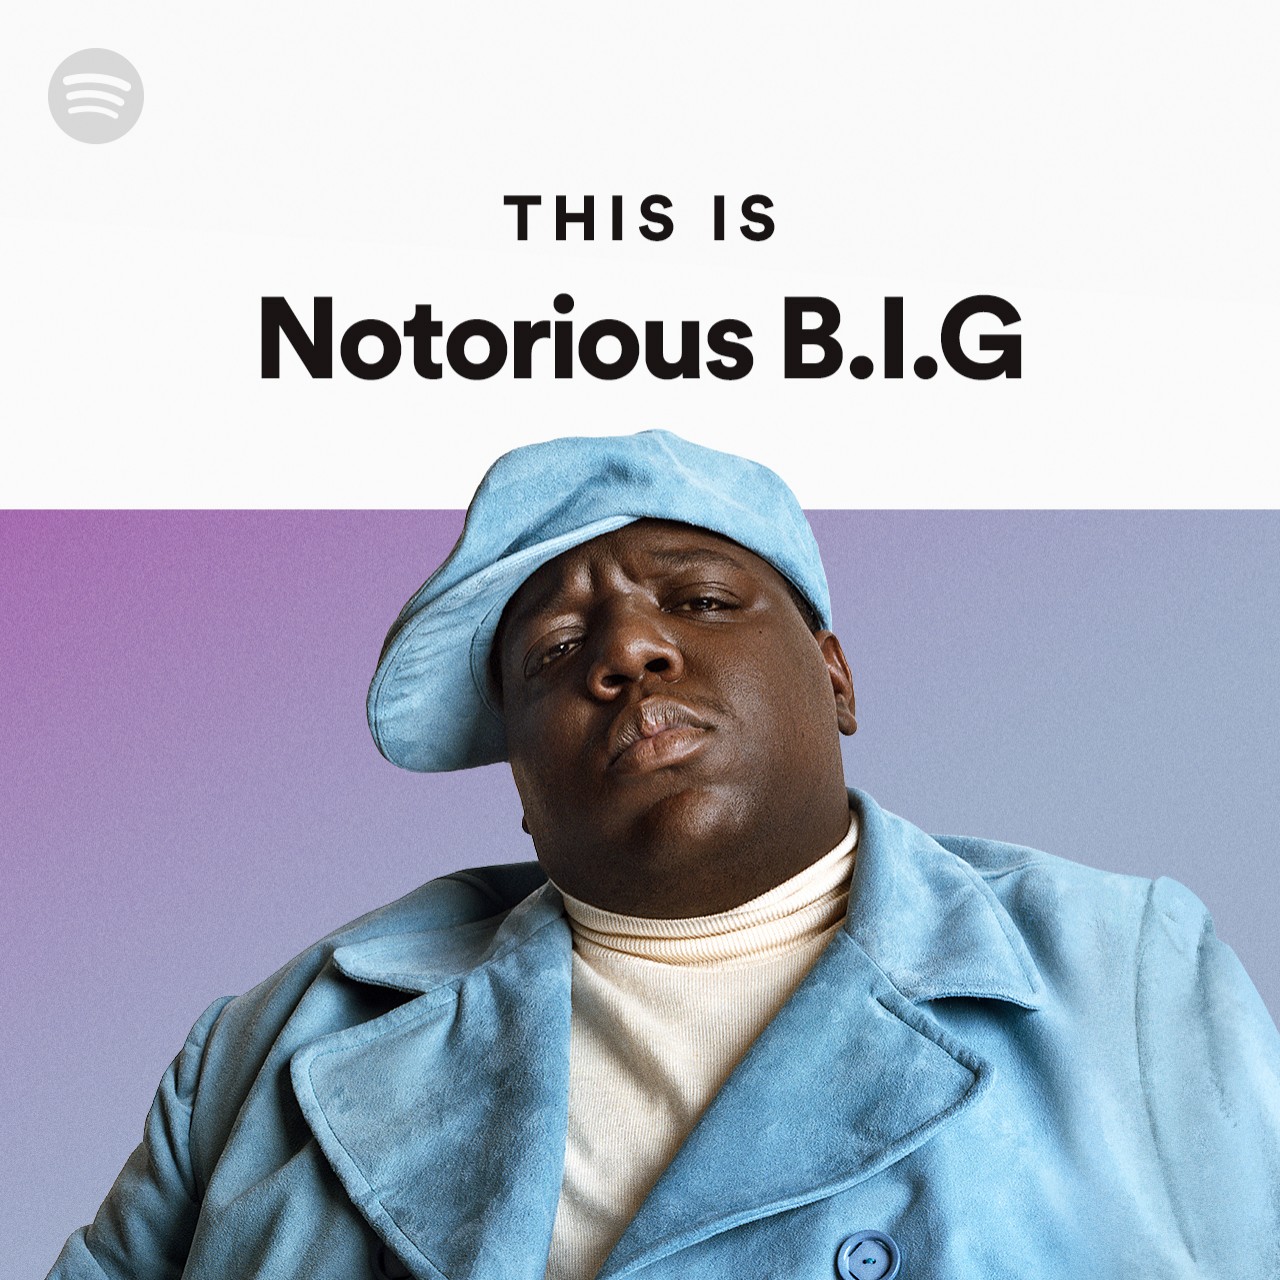 This Is The Notorious B.I.G.